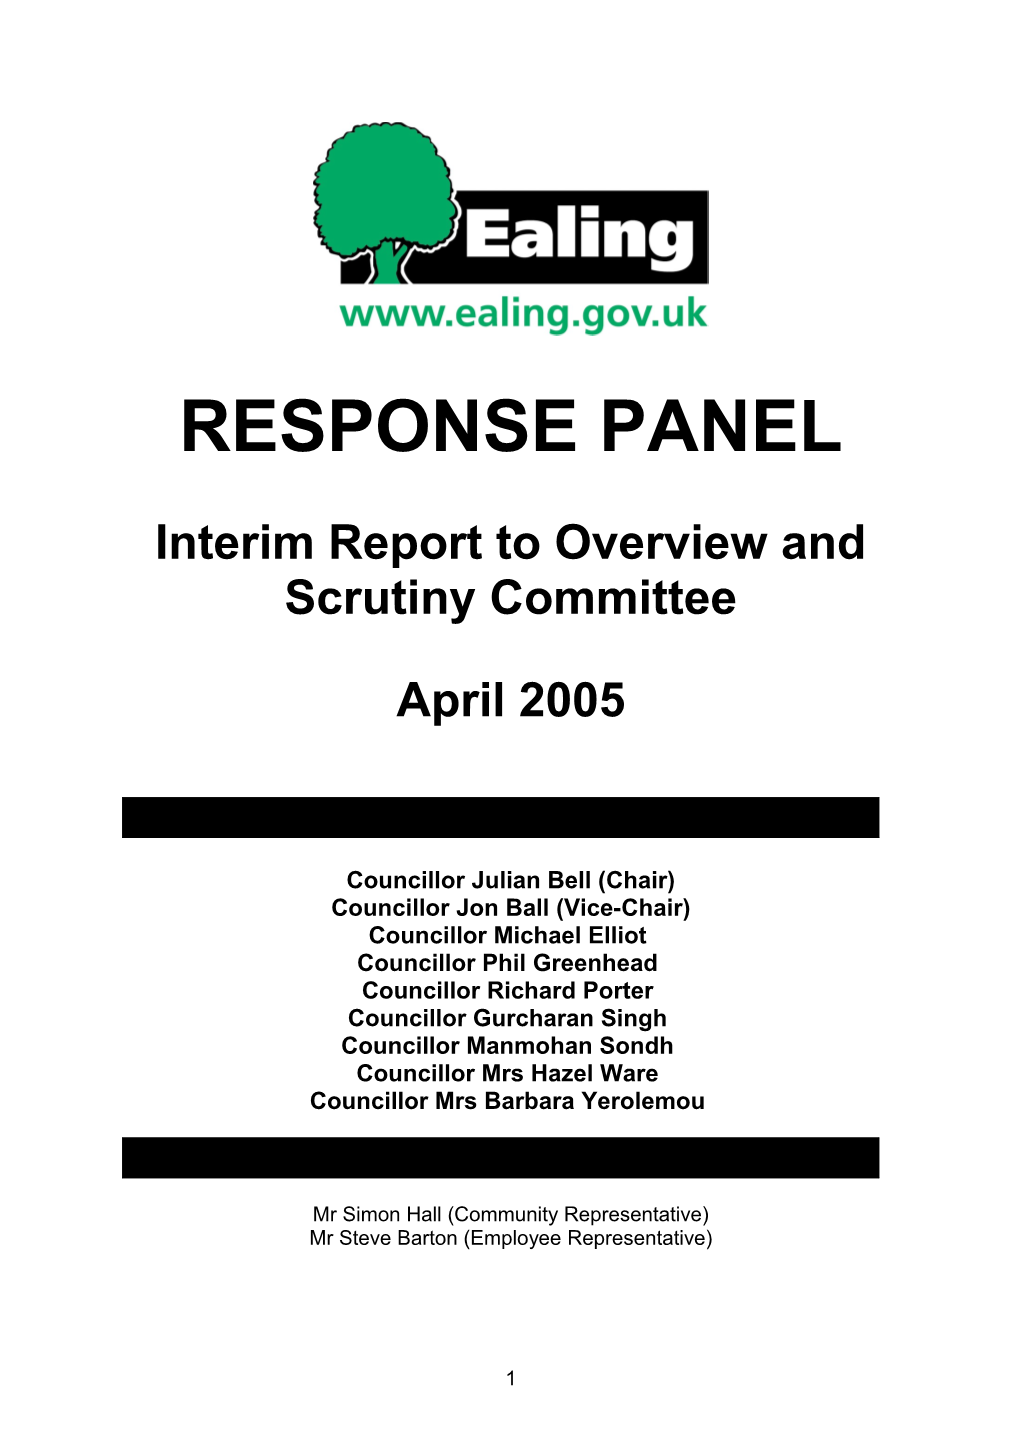 Interim Report to Overview and Scrutiny Committee